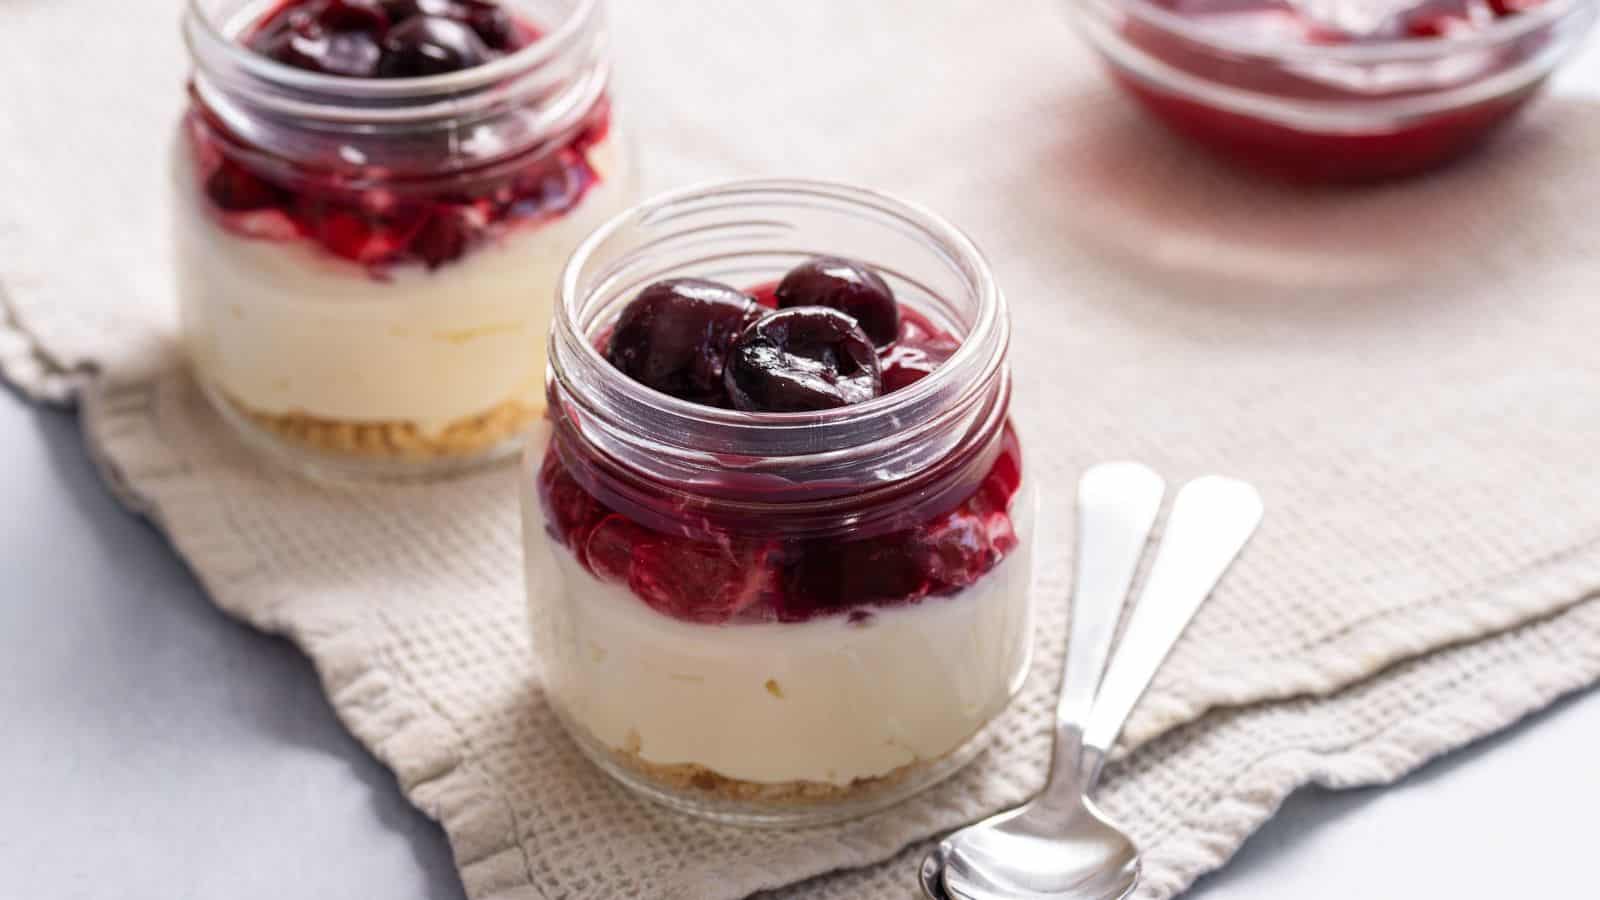 Two jars of layered cheesecake with a graham cracker base, cream cheese filling, and a topping of dark red cherries, on a cloth with spoons beside them.